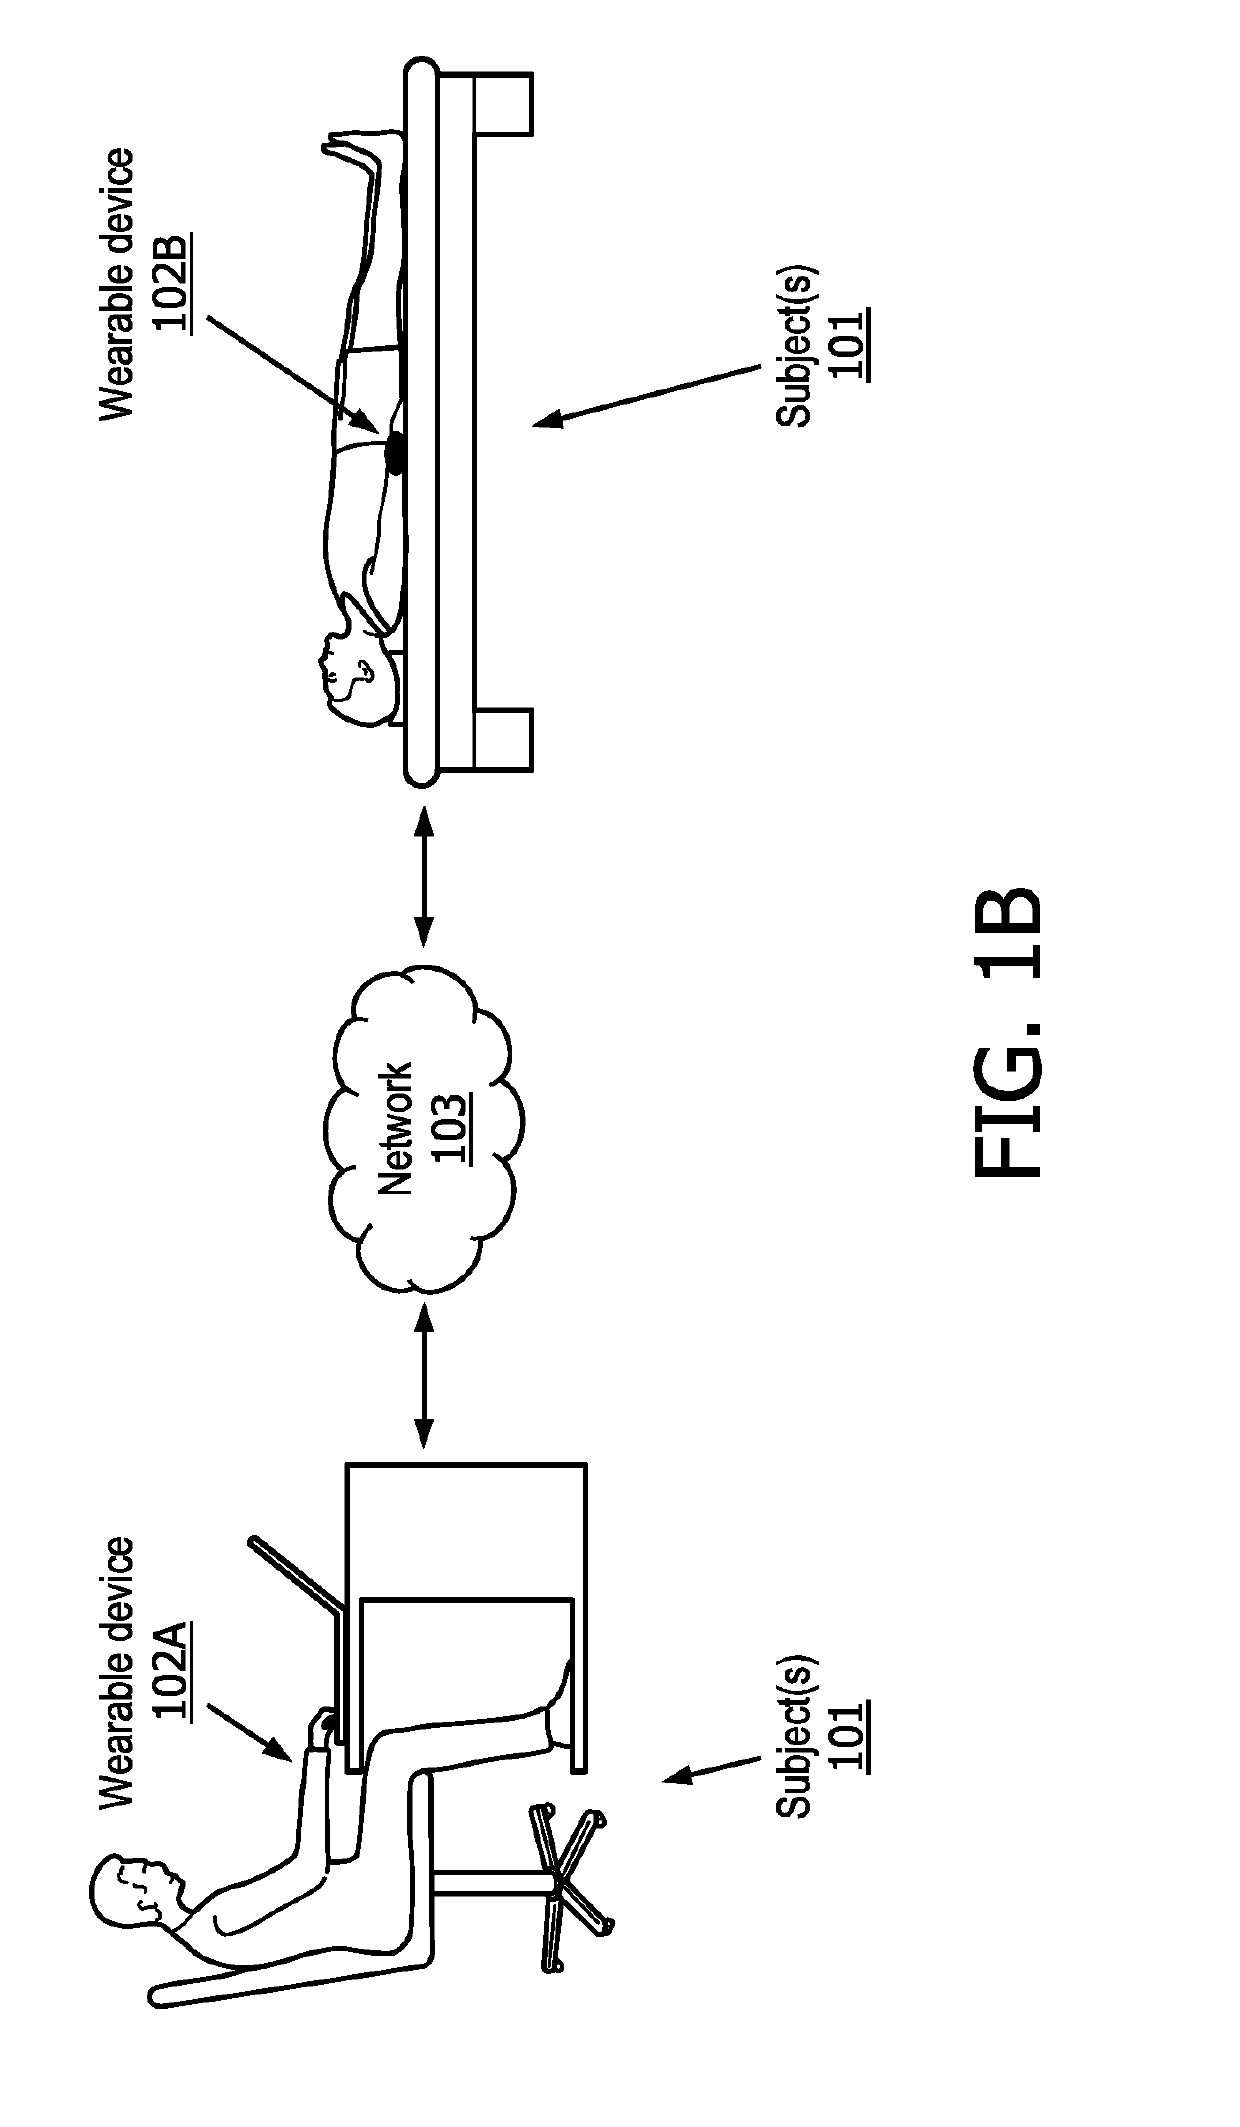 System and method for non-invasive determination of blood pressure dip based on trained prediction models